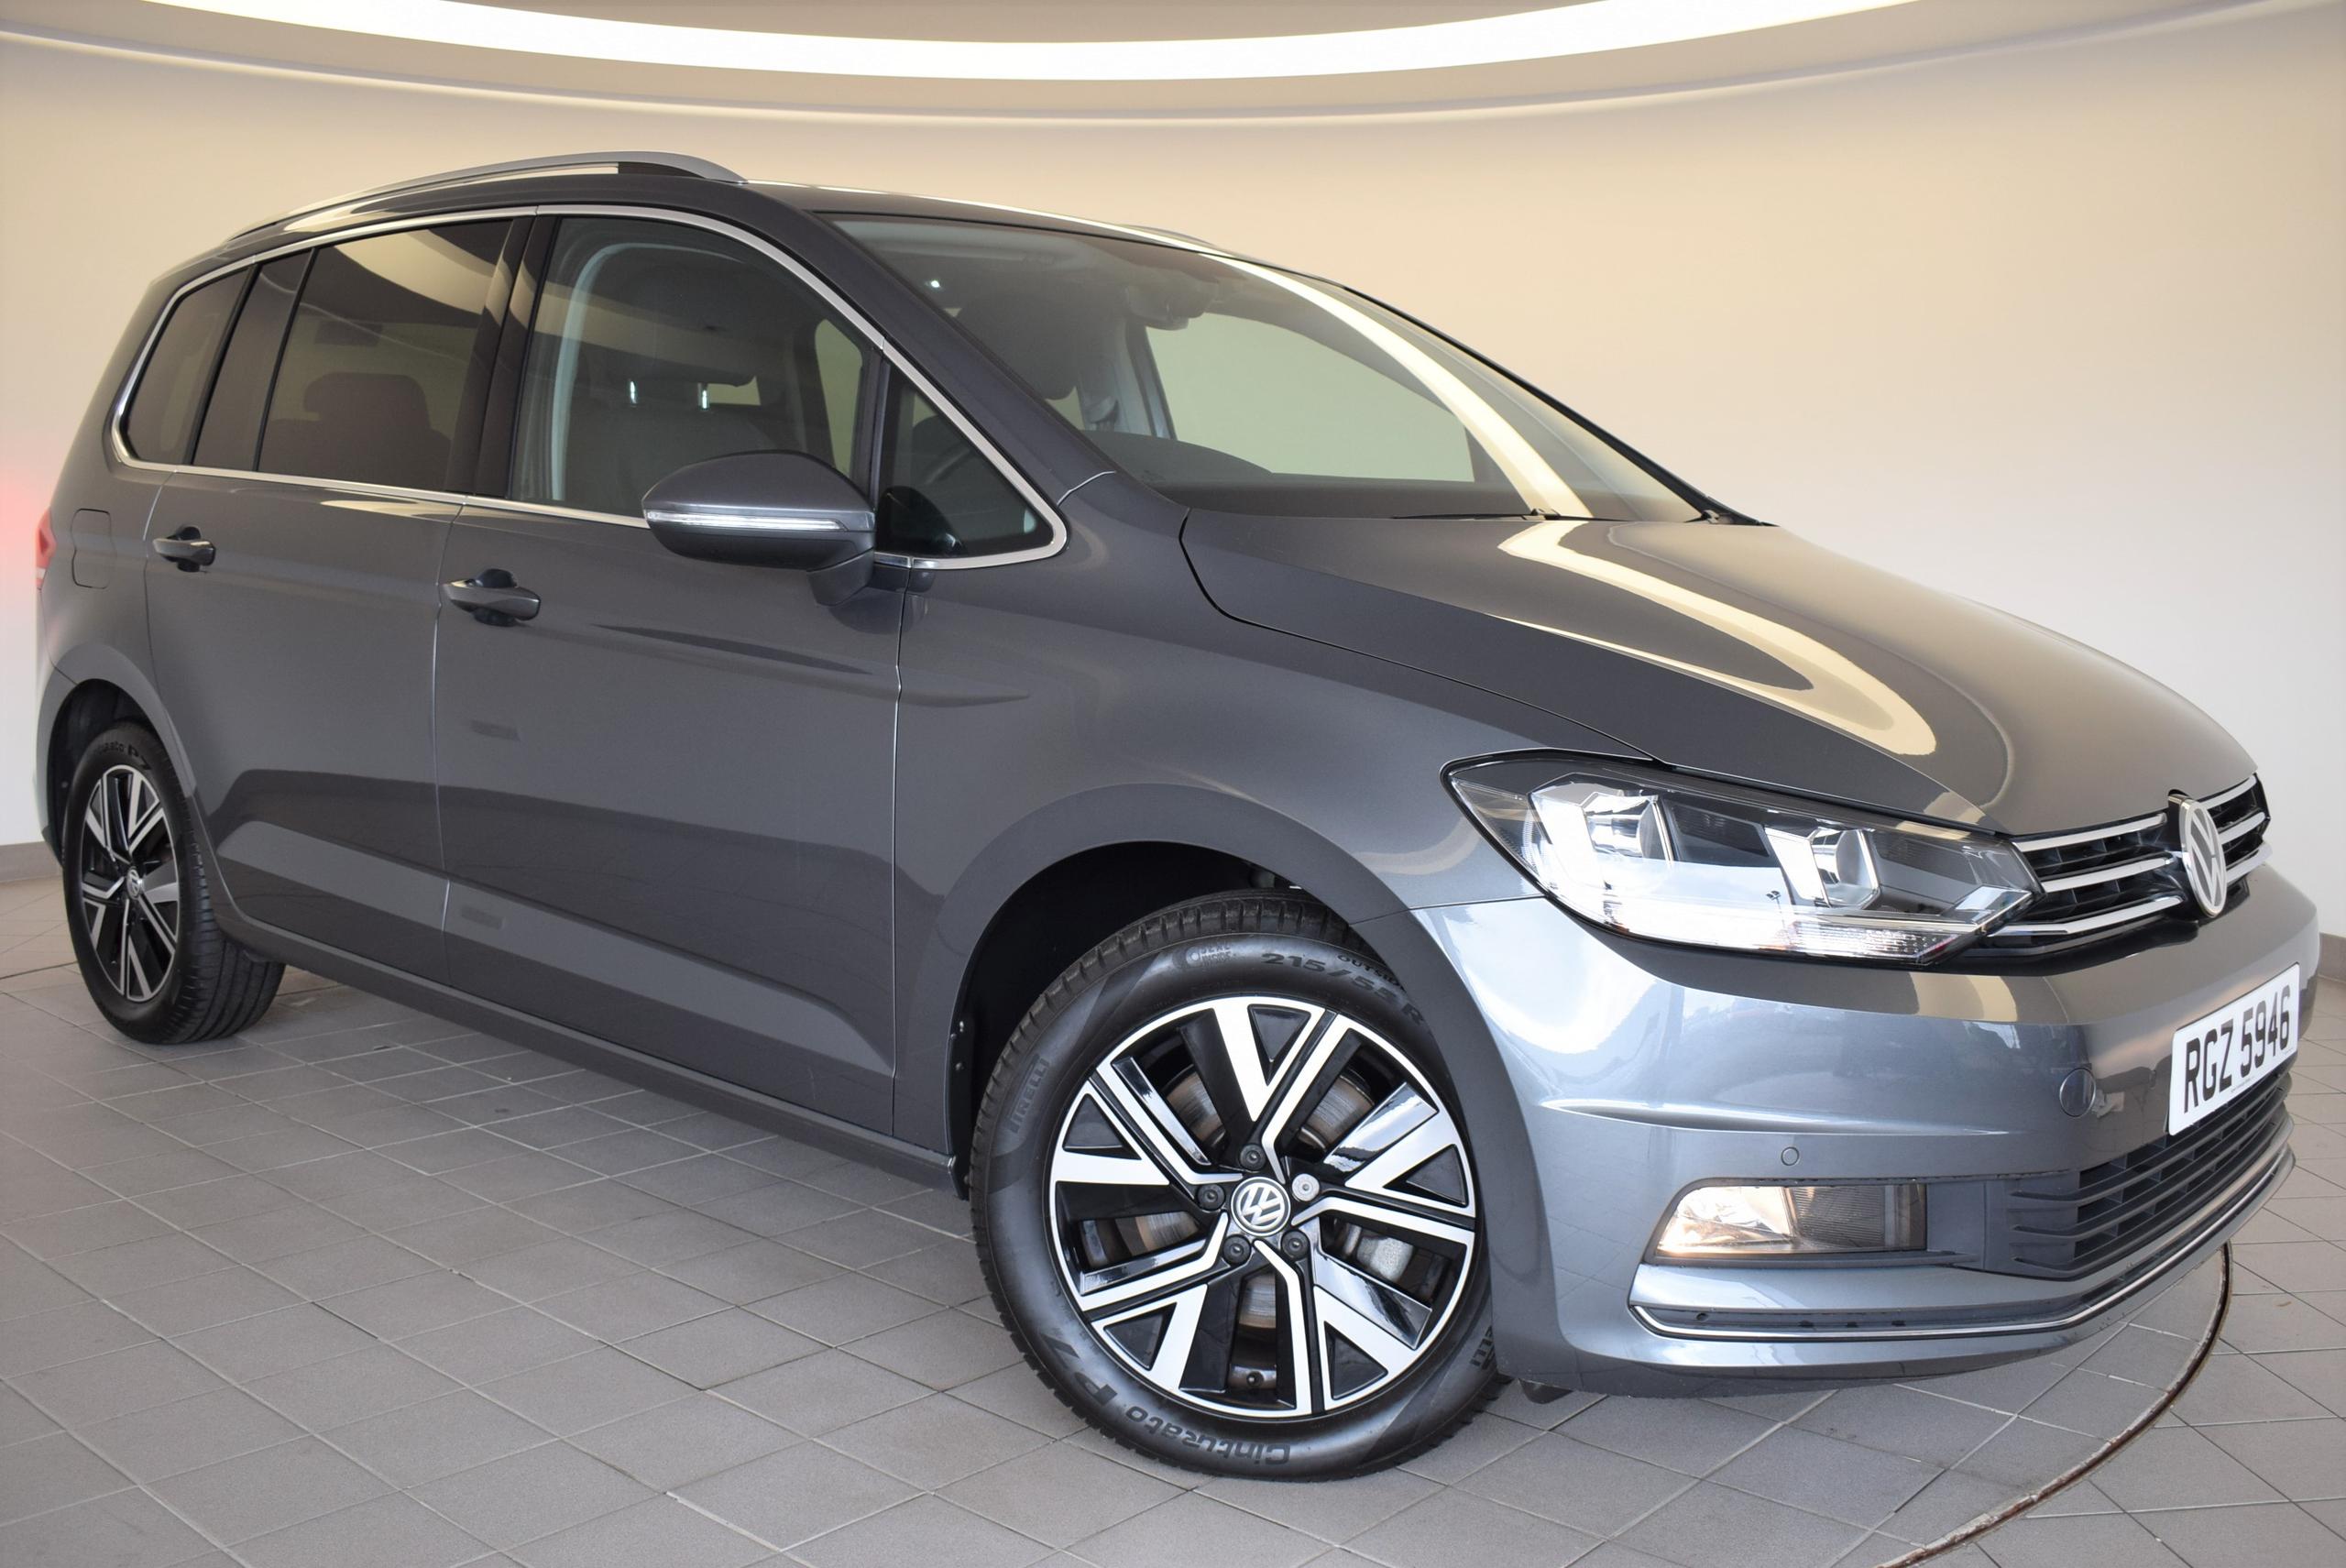 Volkswagen Touran Colours, Free & Paid Options